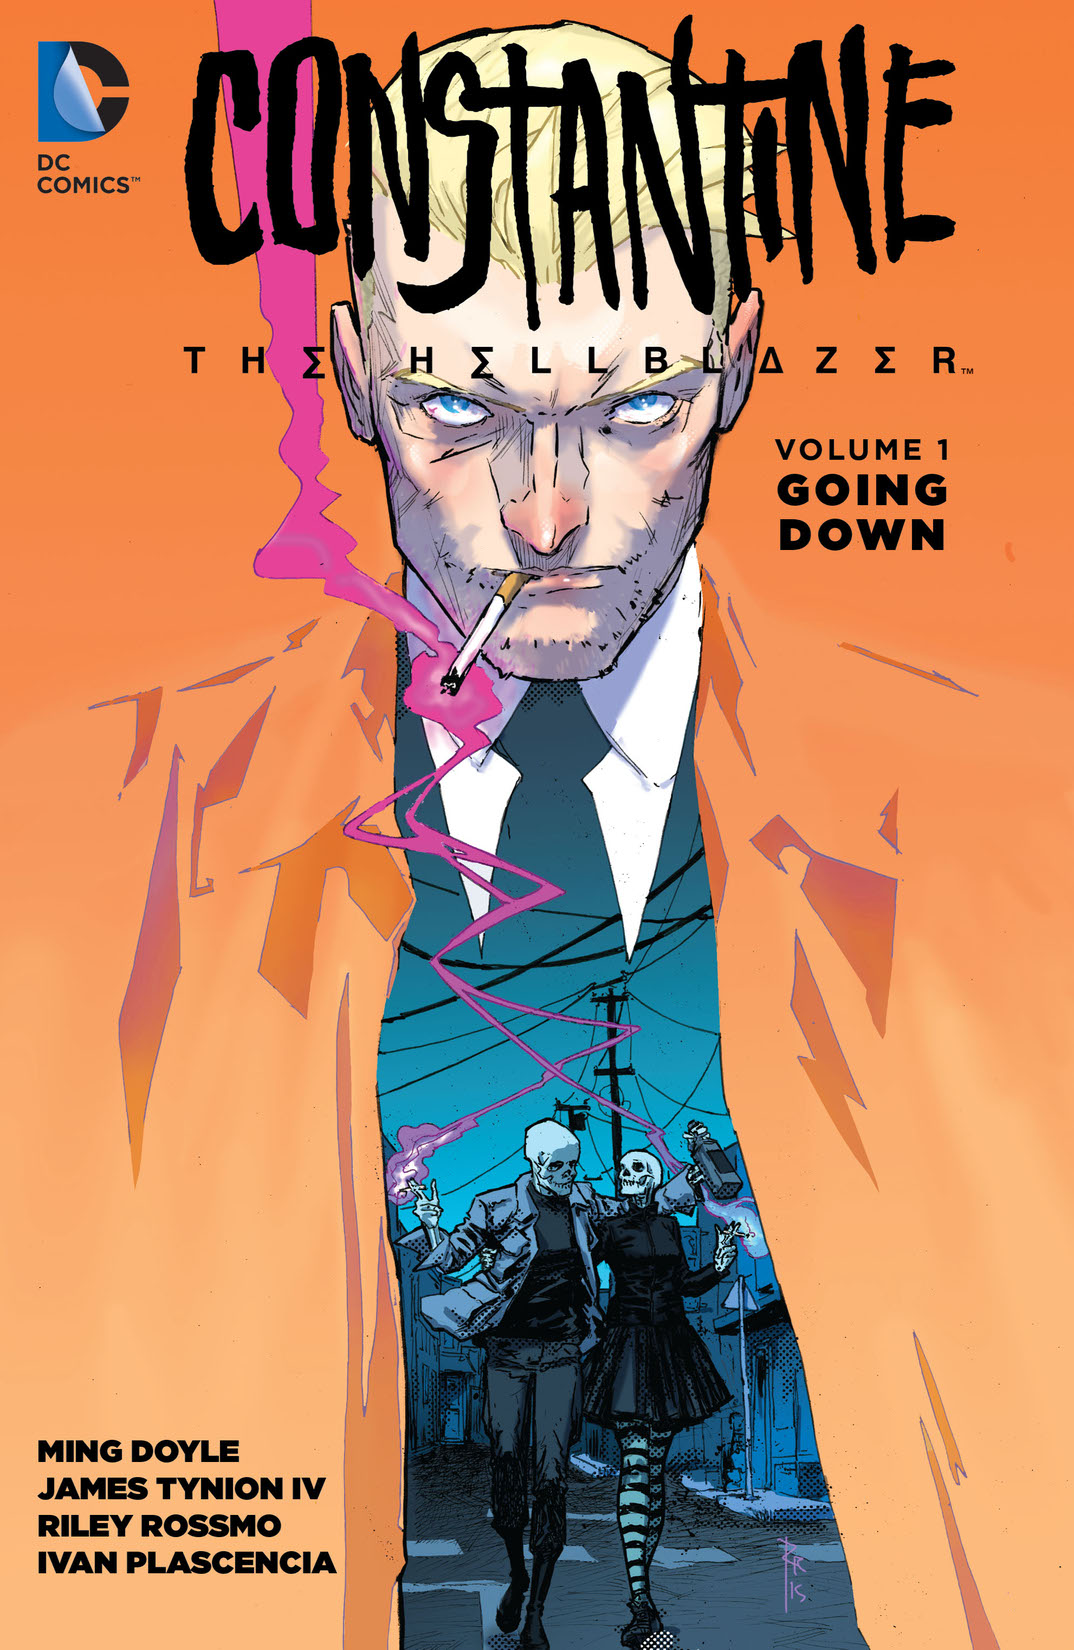 Constantine: The Hellblazer Vol. 1: Going Down preview images